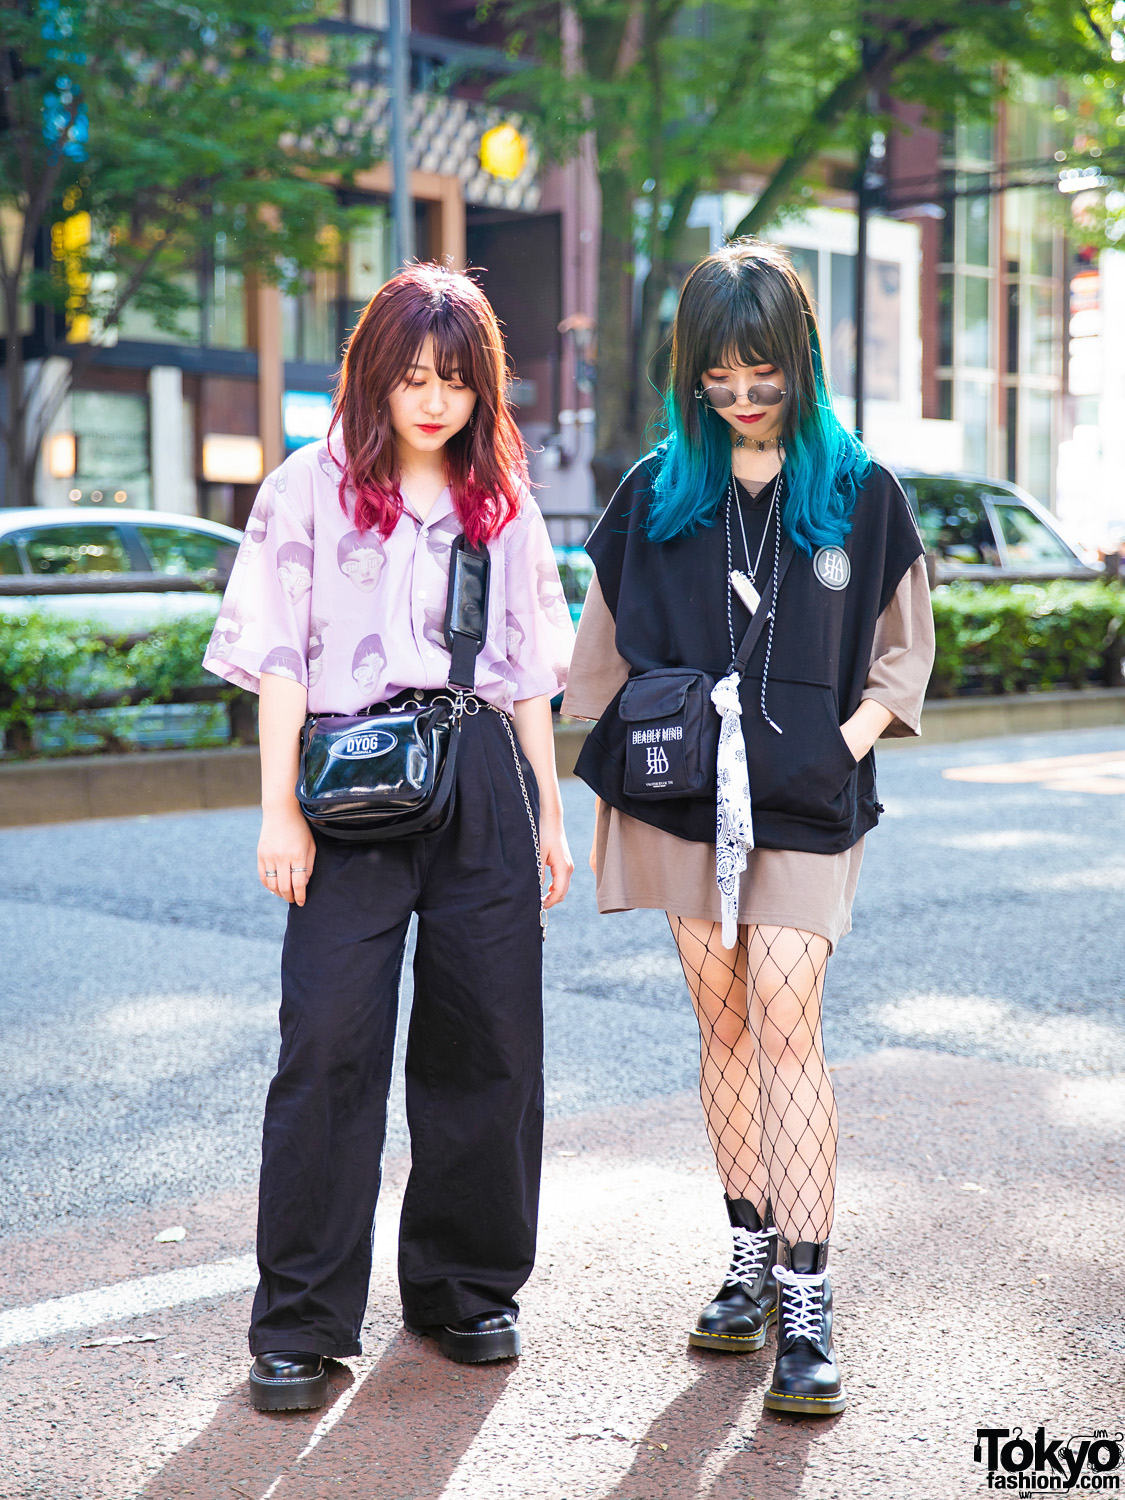 Teens From Tokyo